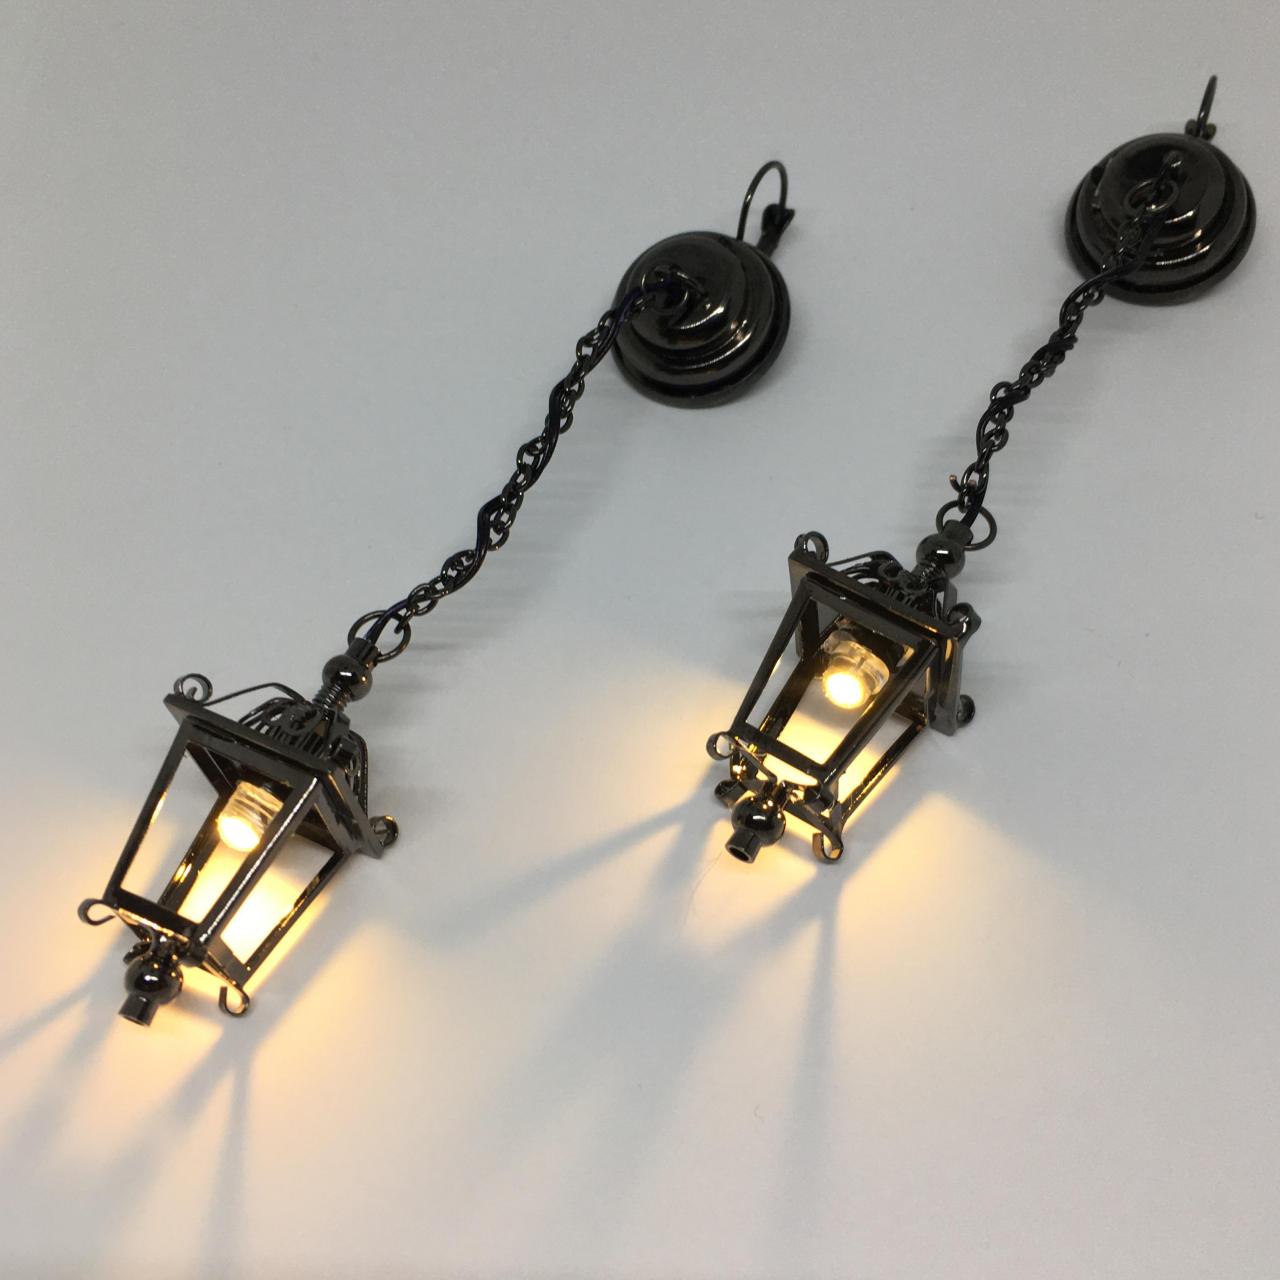 scifiseries:
“A little experiment I’ve been working on - some Victorian street lamp inspired earrings that actually light up 💡
”